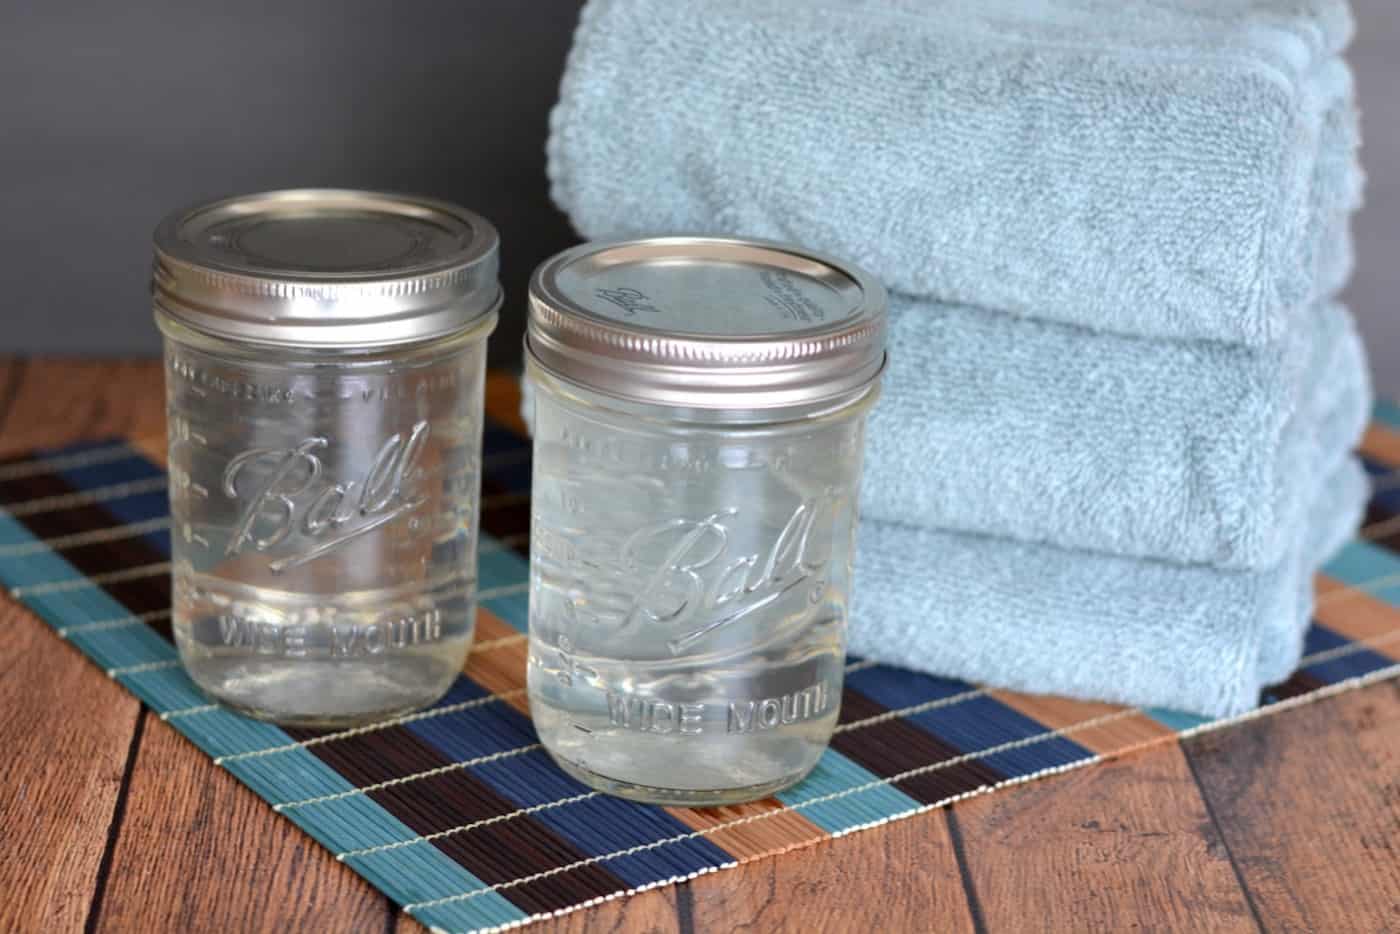 Homemade laundry detergent in two mason jars